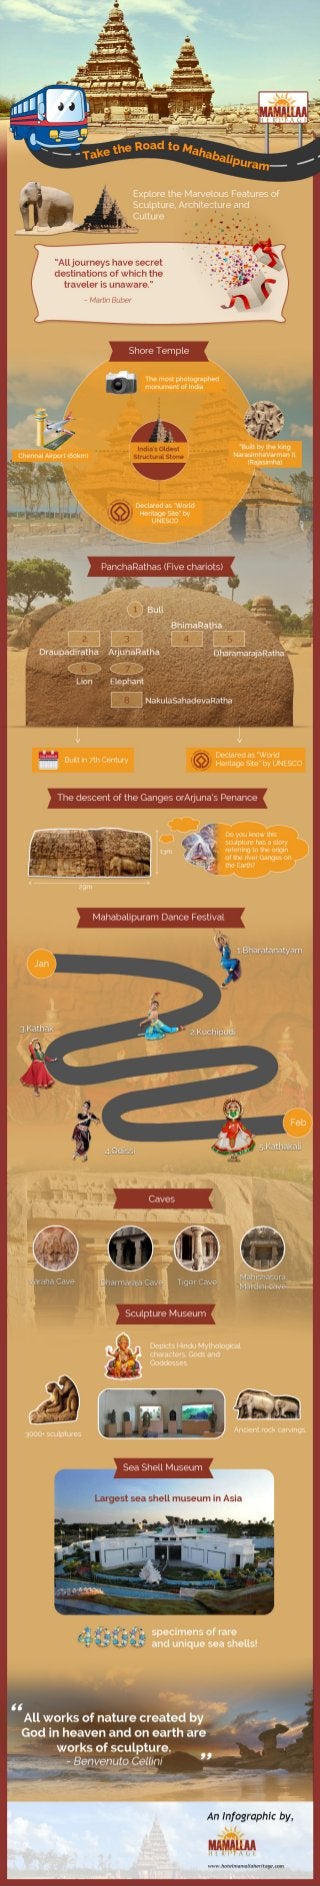 An Infographic on Cultural and Architectural Features of Mahabalipuram